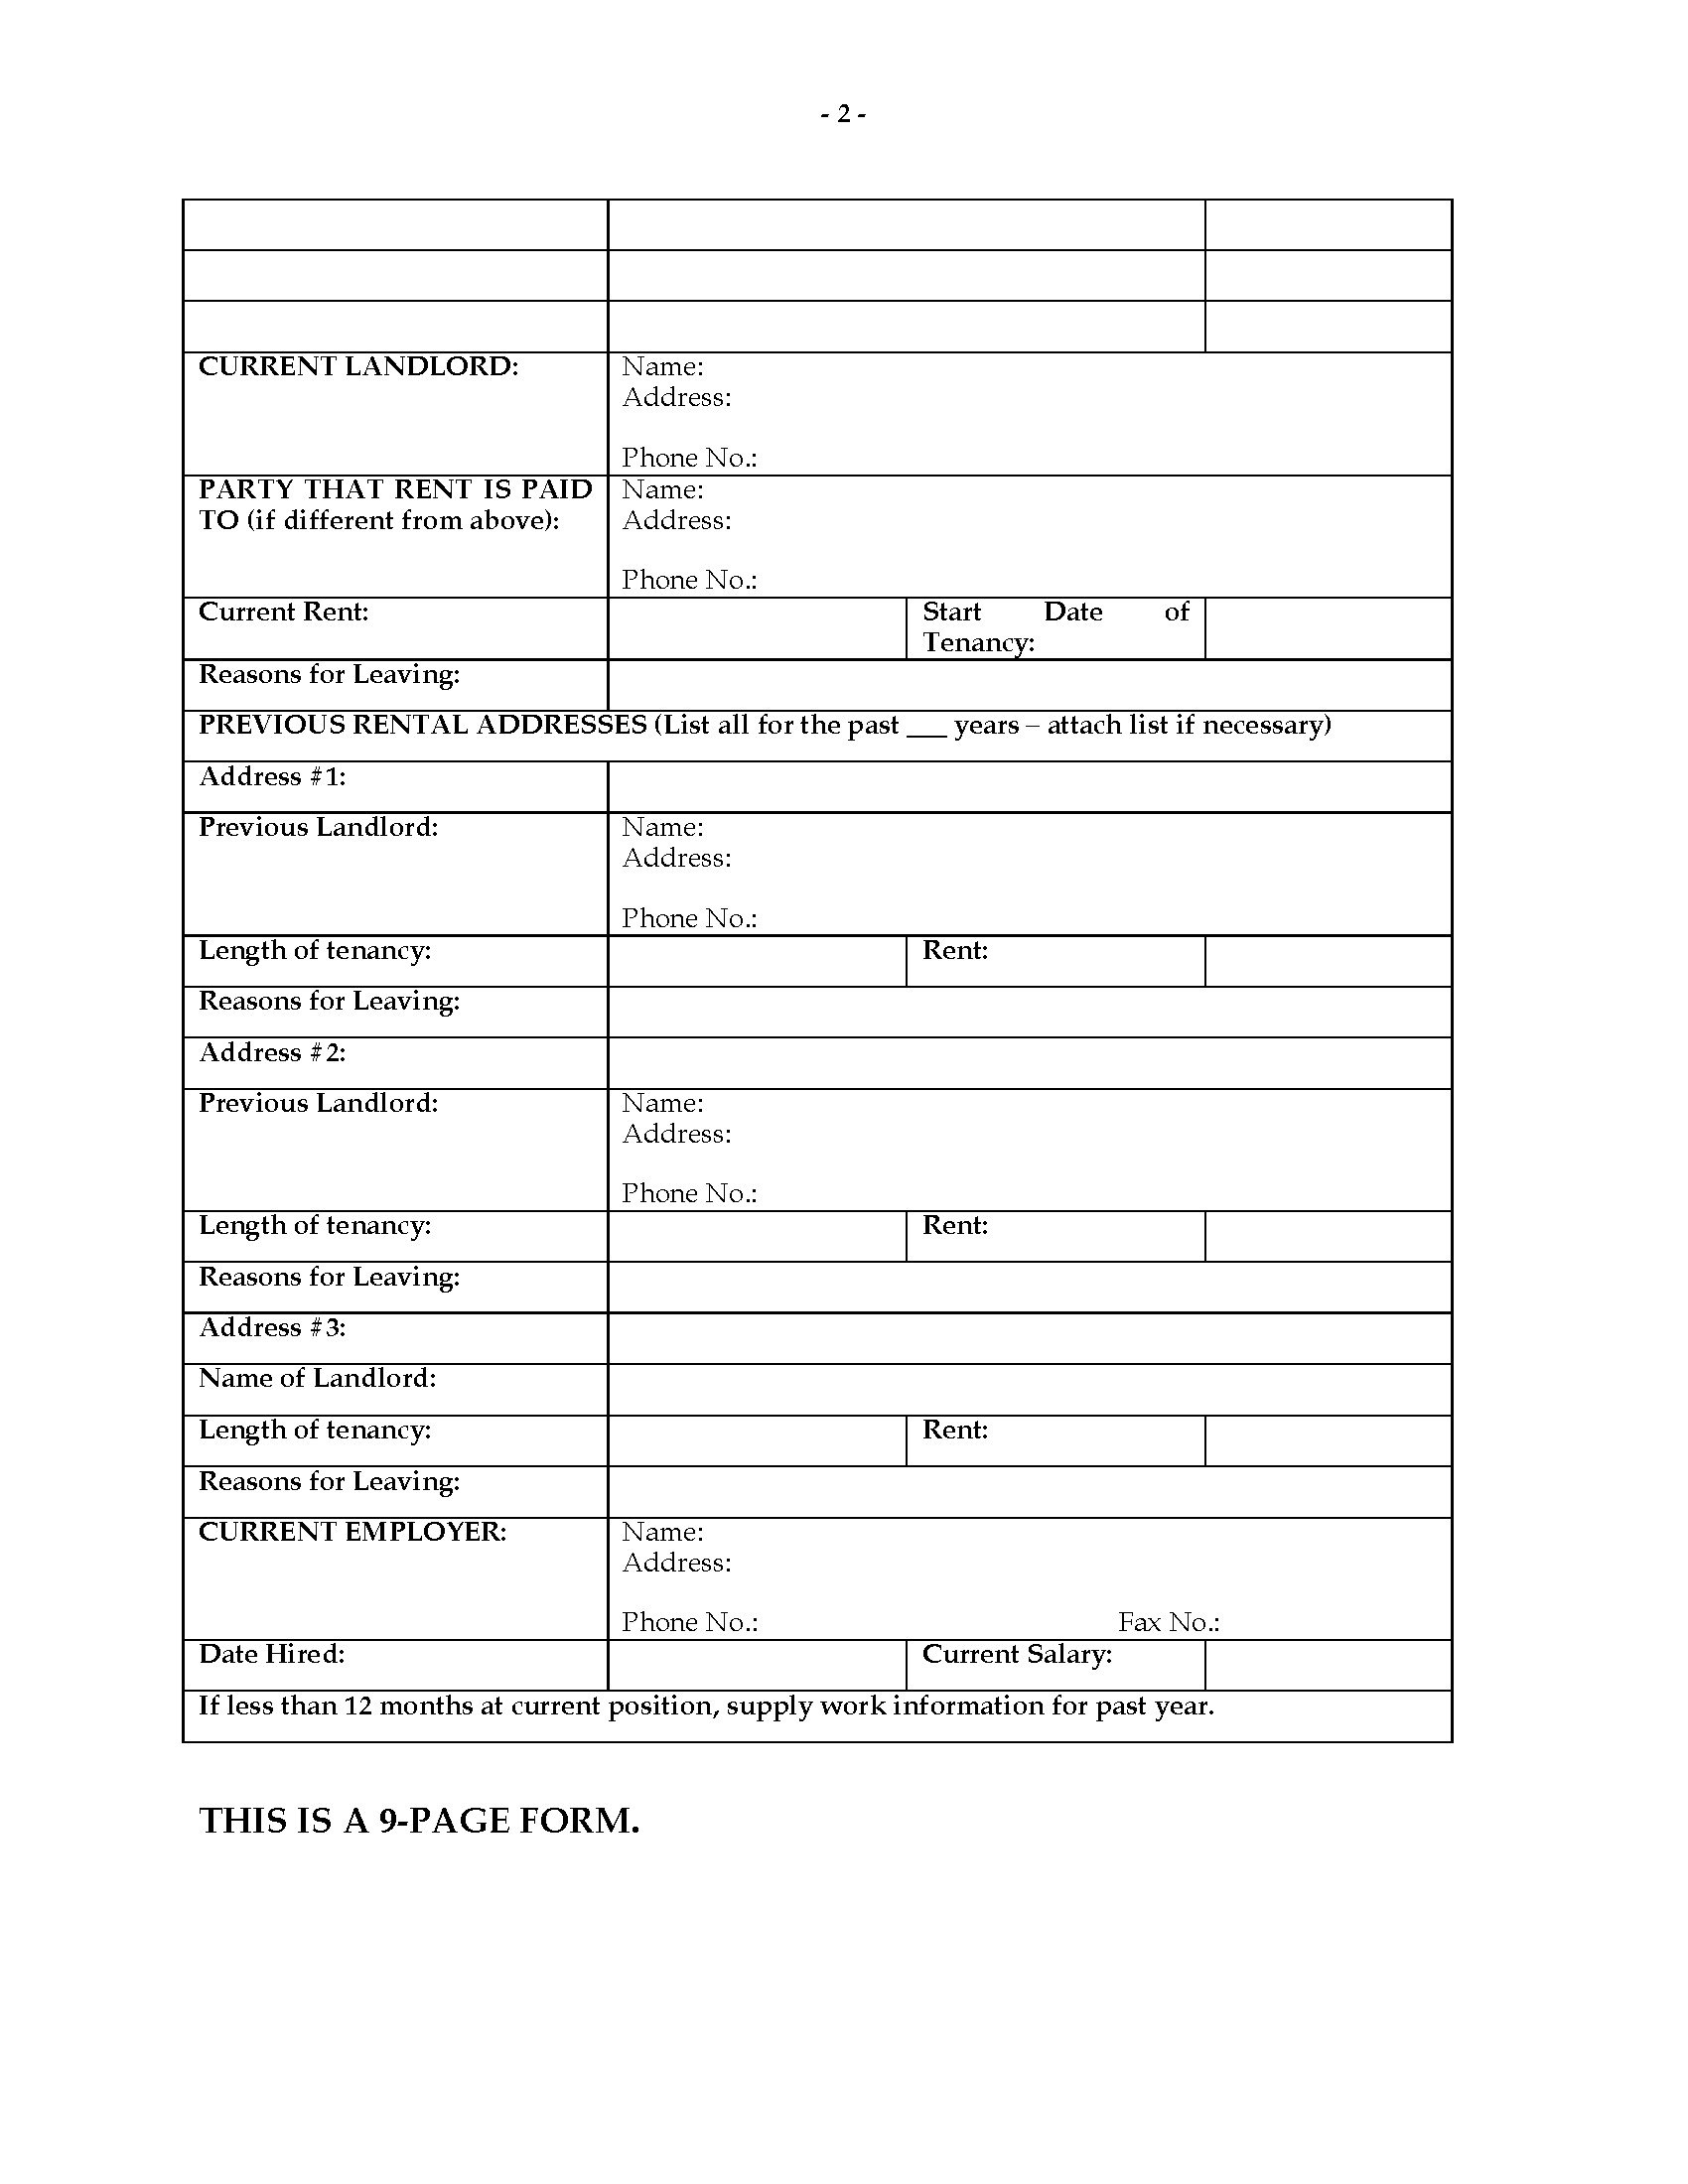 Florida Rental Application Form Legal Forms And Business Templates 2374